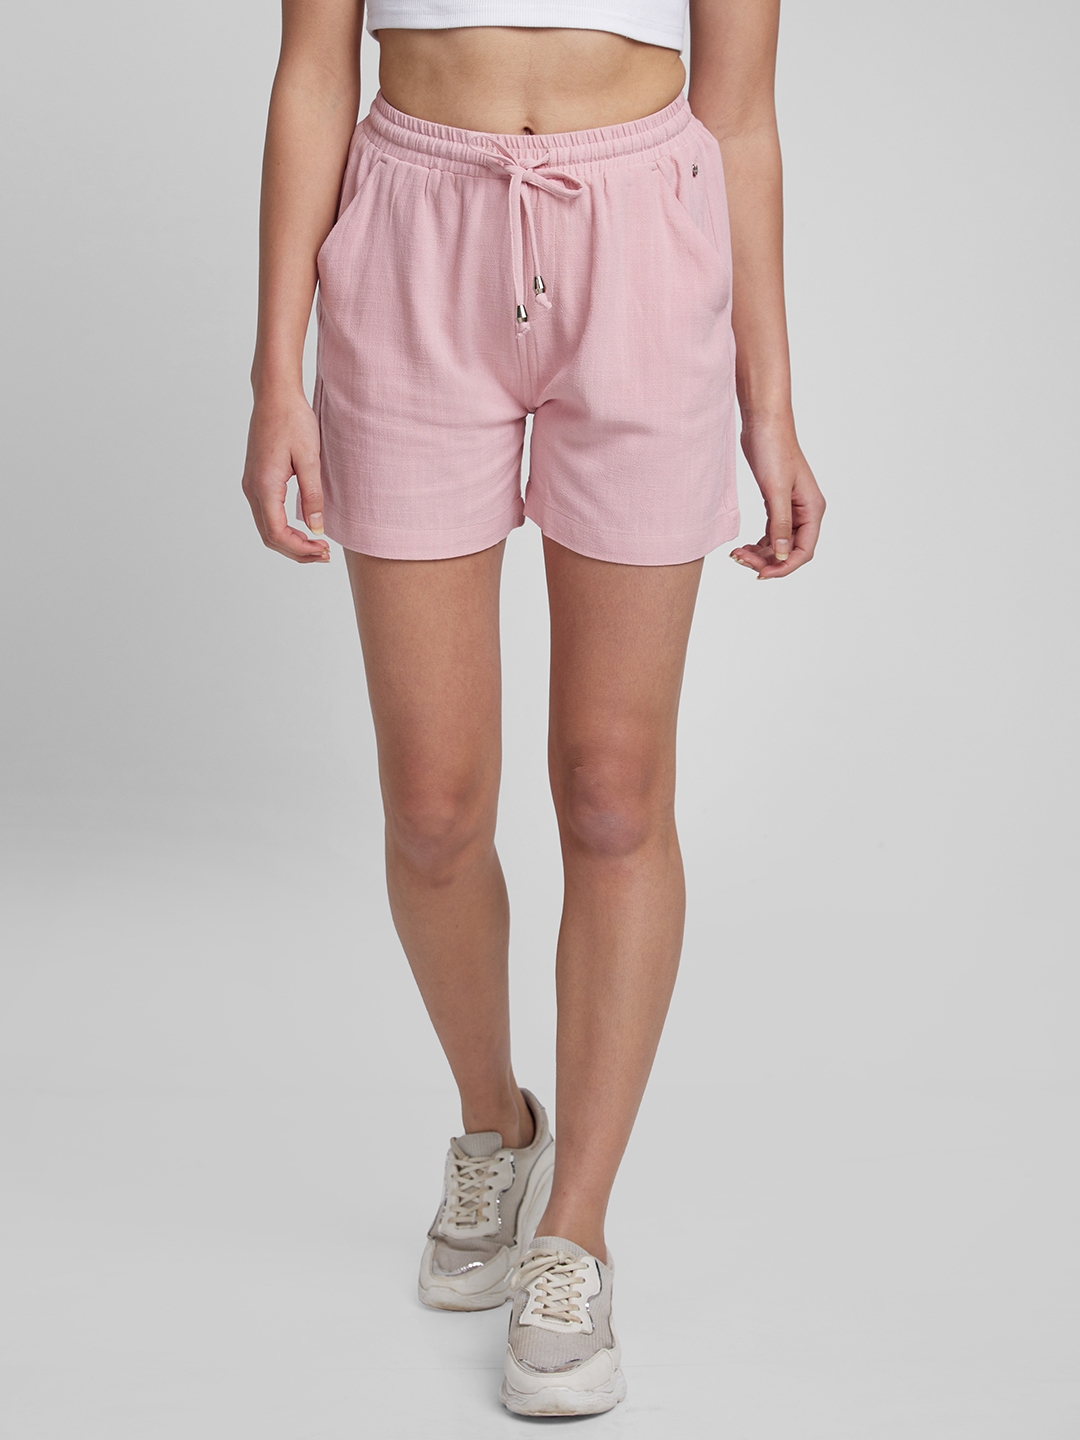 Women's Pink Cotton Blend Solid Shorts